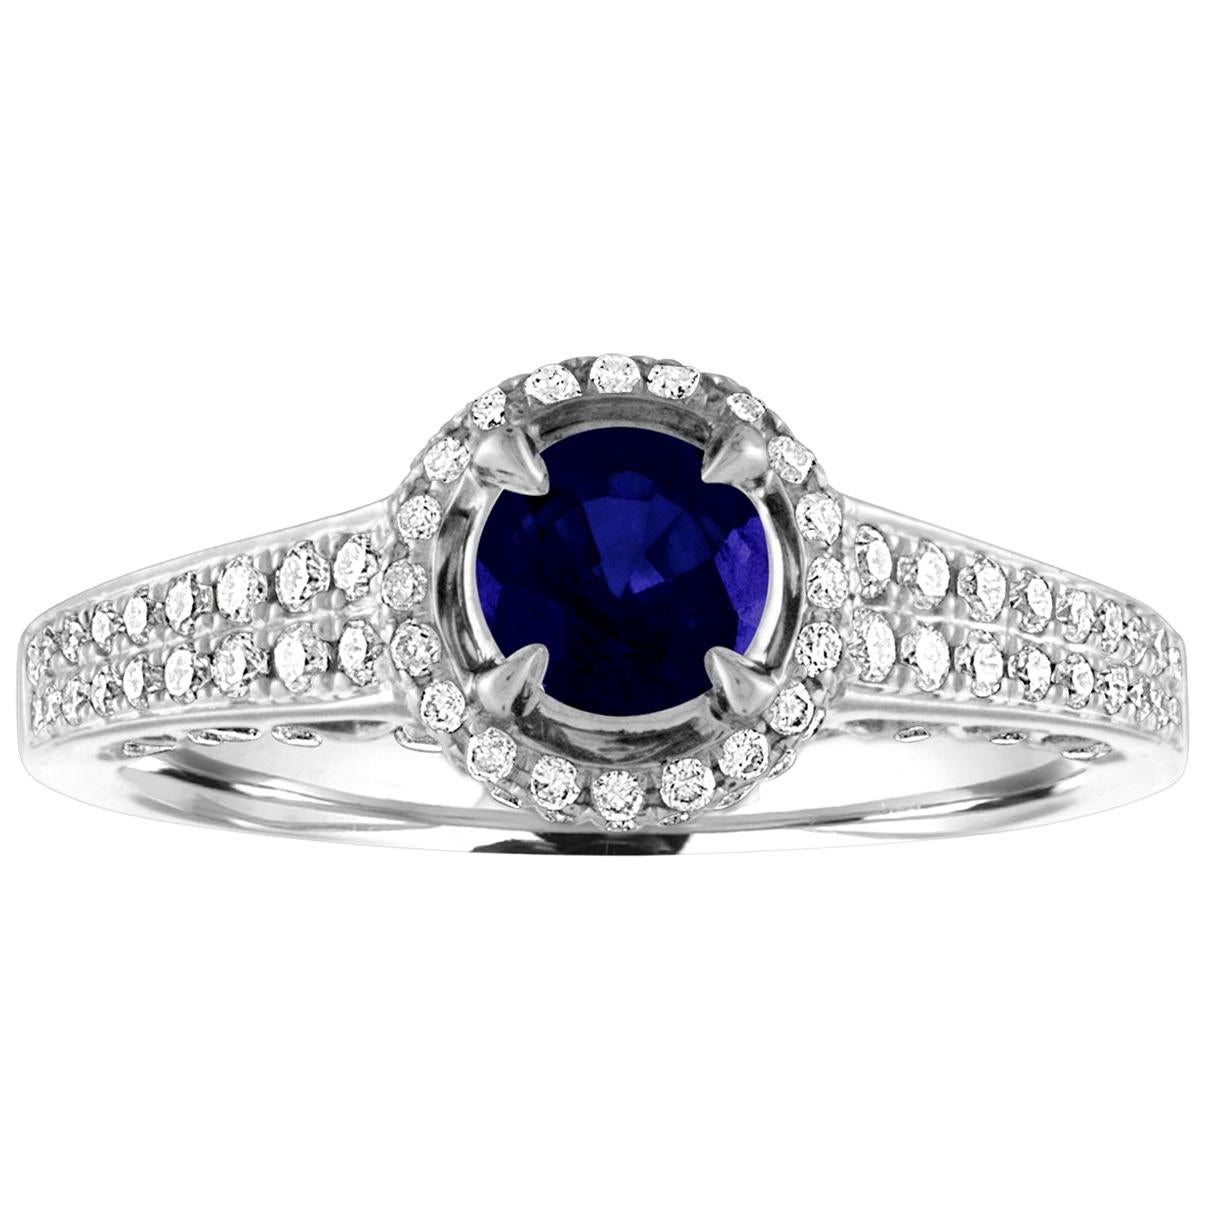 AGL Certified 0.91 Carat Round Sapphire Diamond Gold Ring For Sale